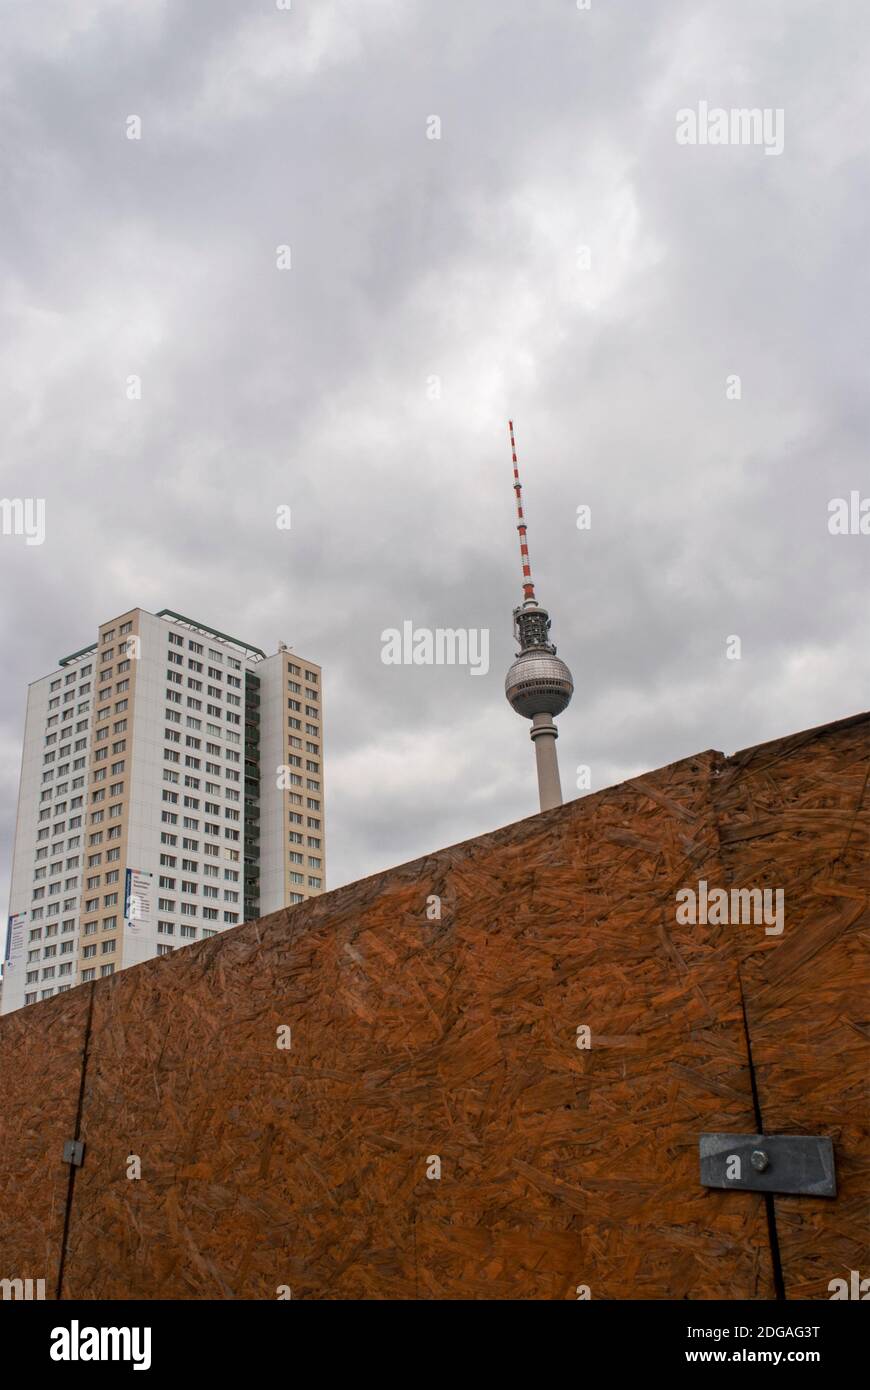 television tower and plattenbau building behind a construction site fence, Berlin, Germany Stock Photo